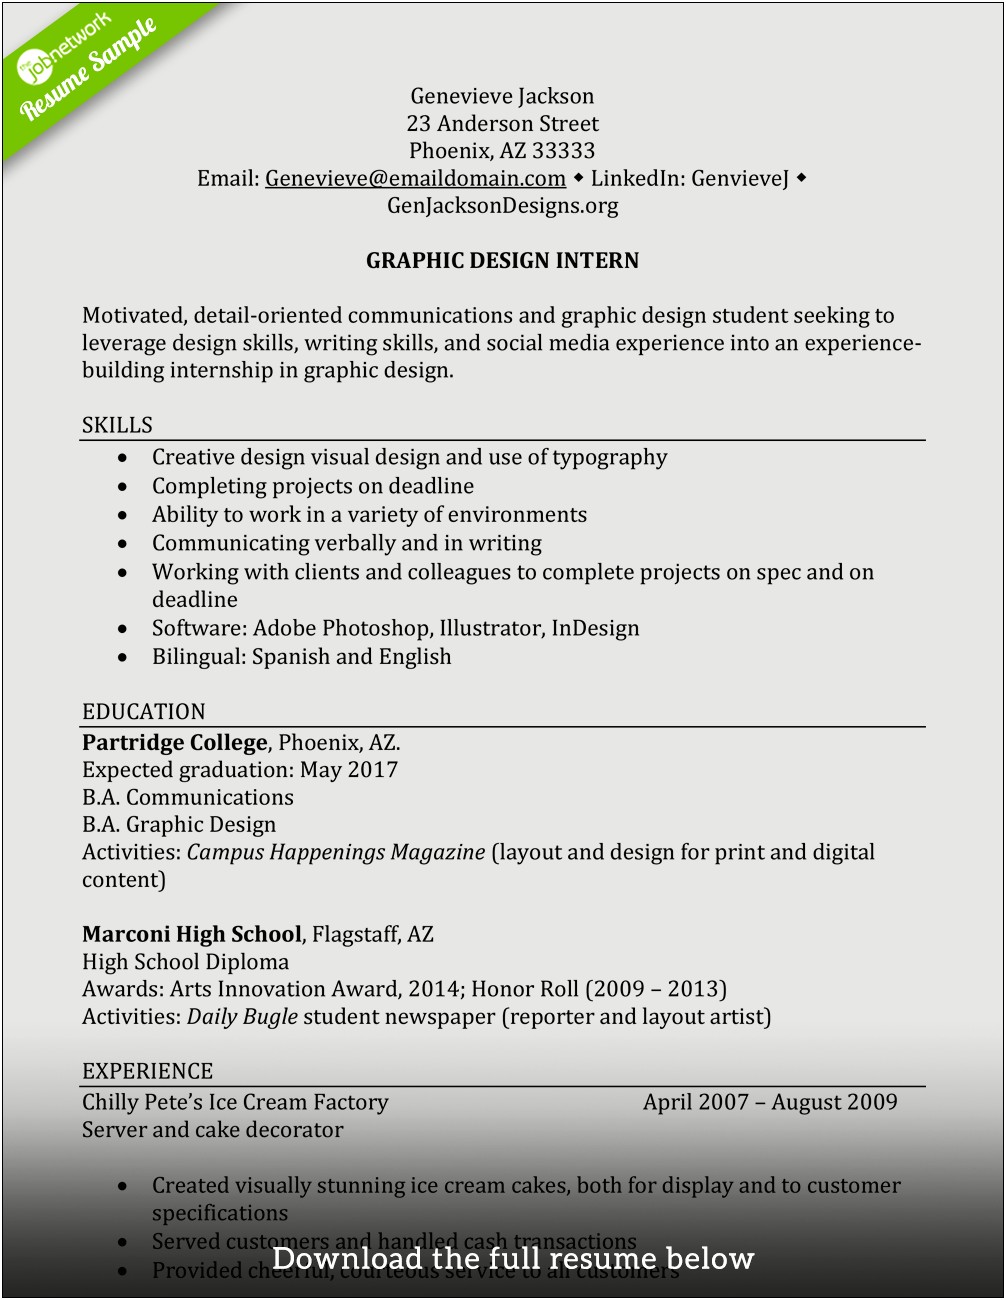 Resume Examples For College Students With Work Experience